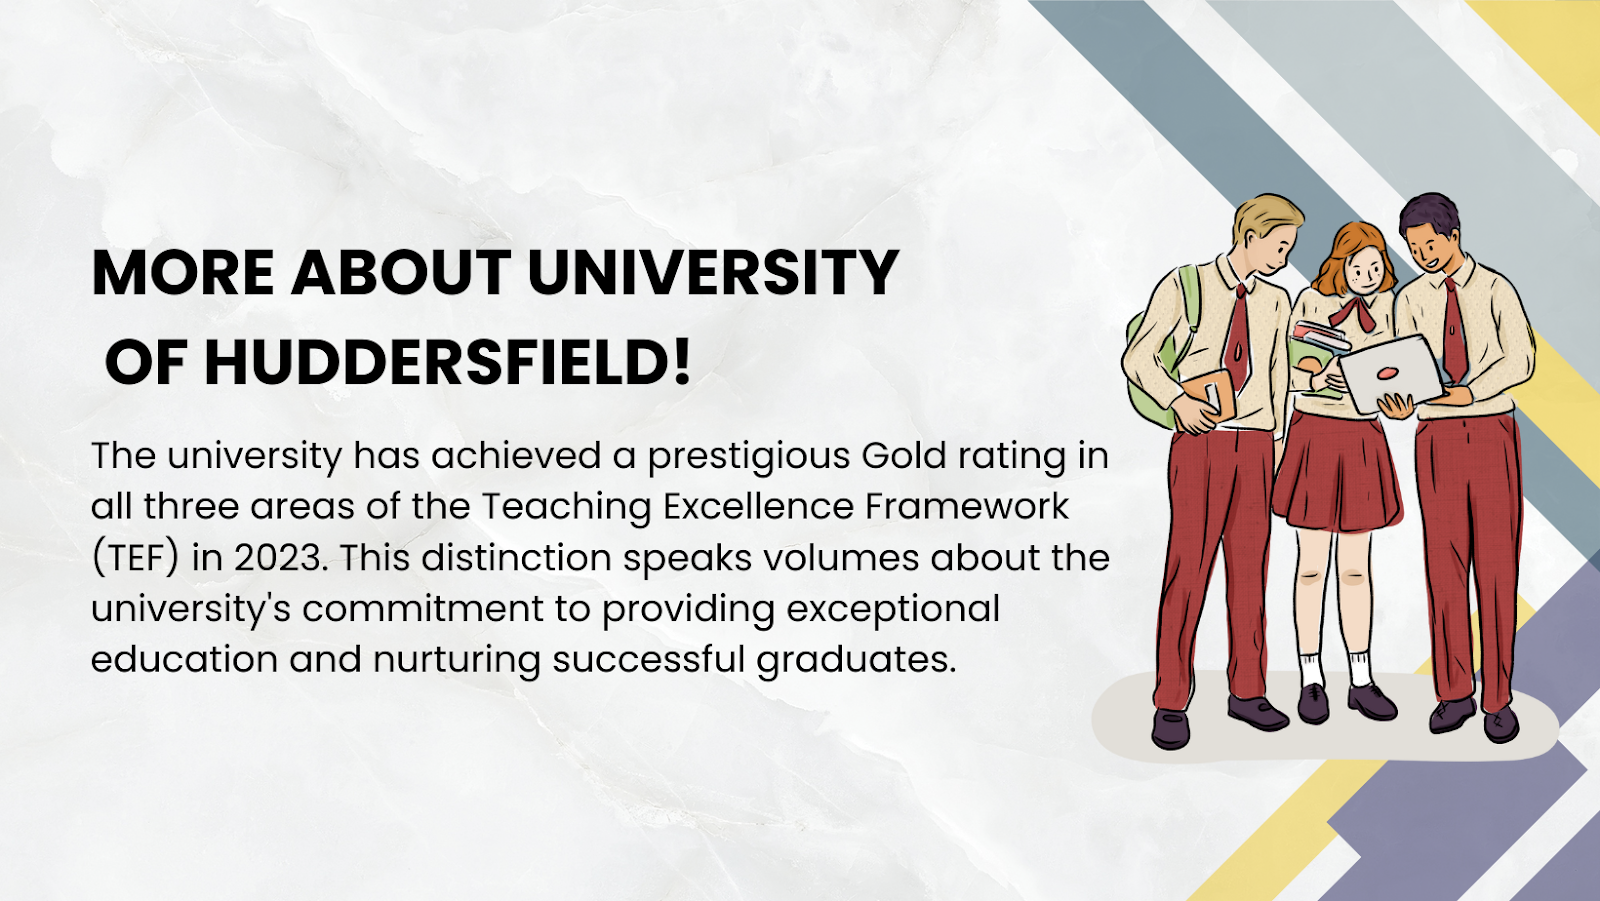 More information about University of Huddersfield.